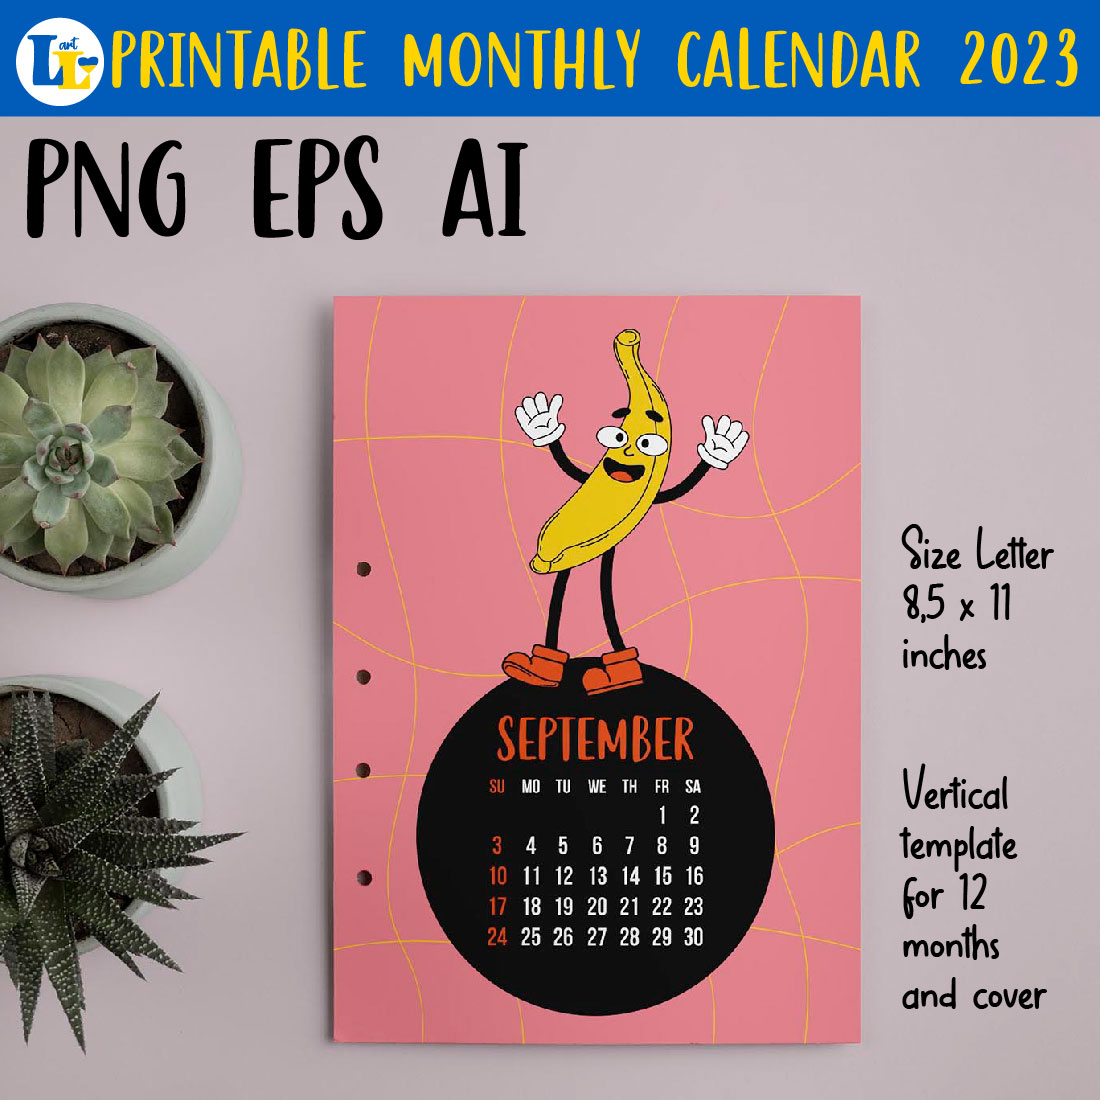 Retro Groovy Style Calendar 2023 Printable Monthly Template preview image.